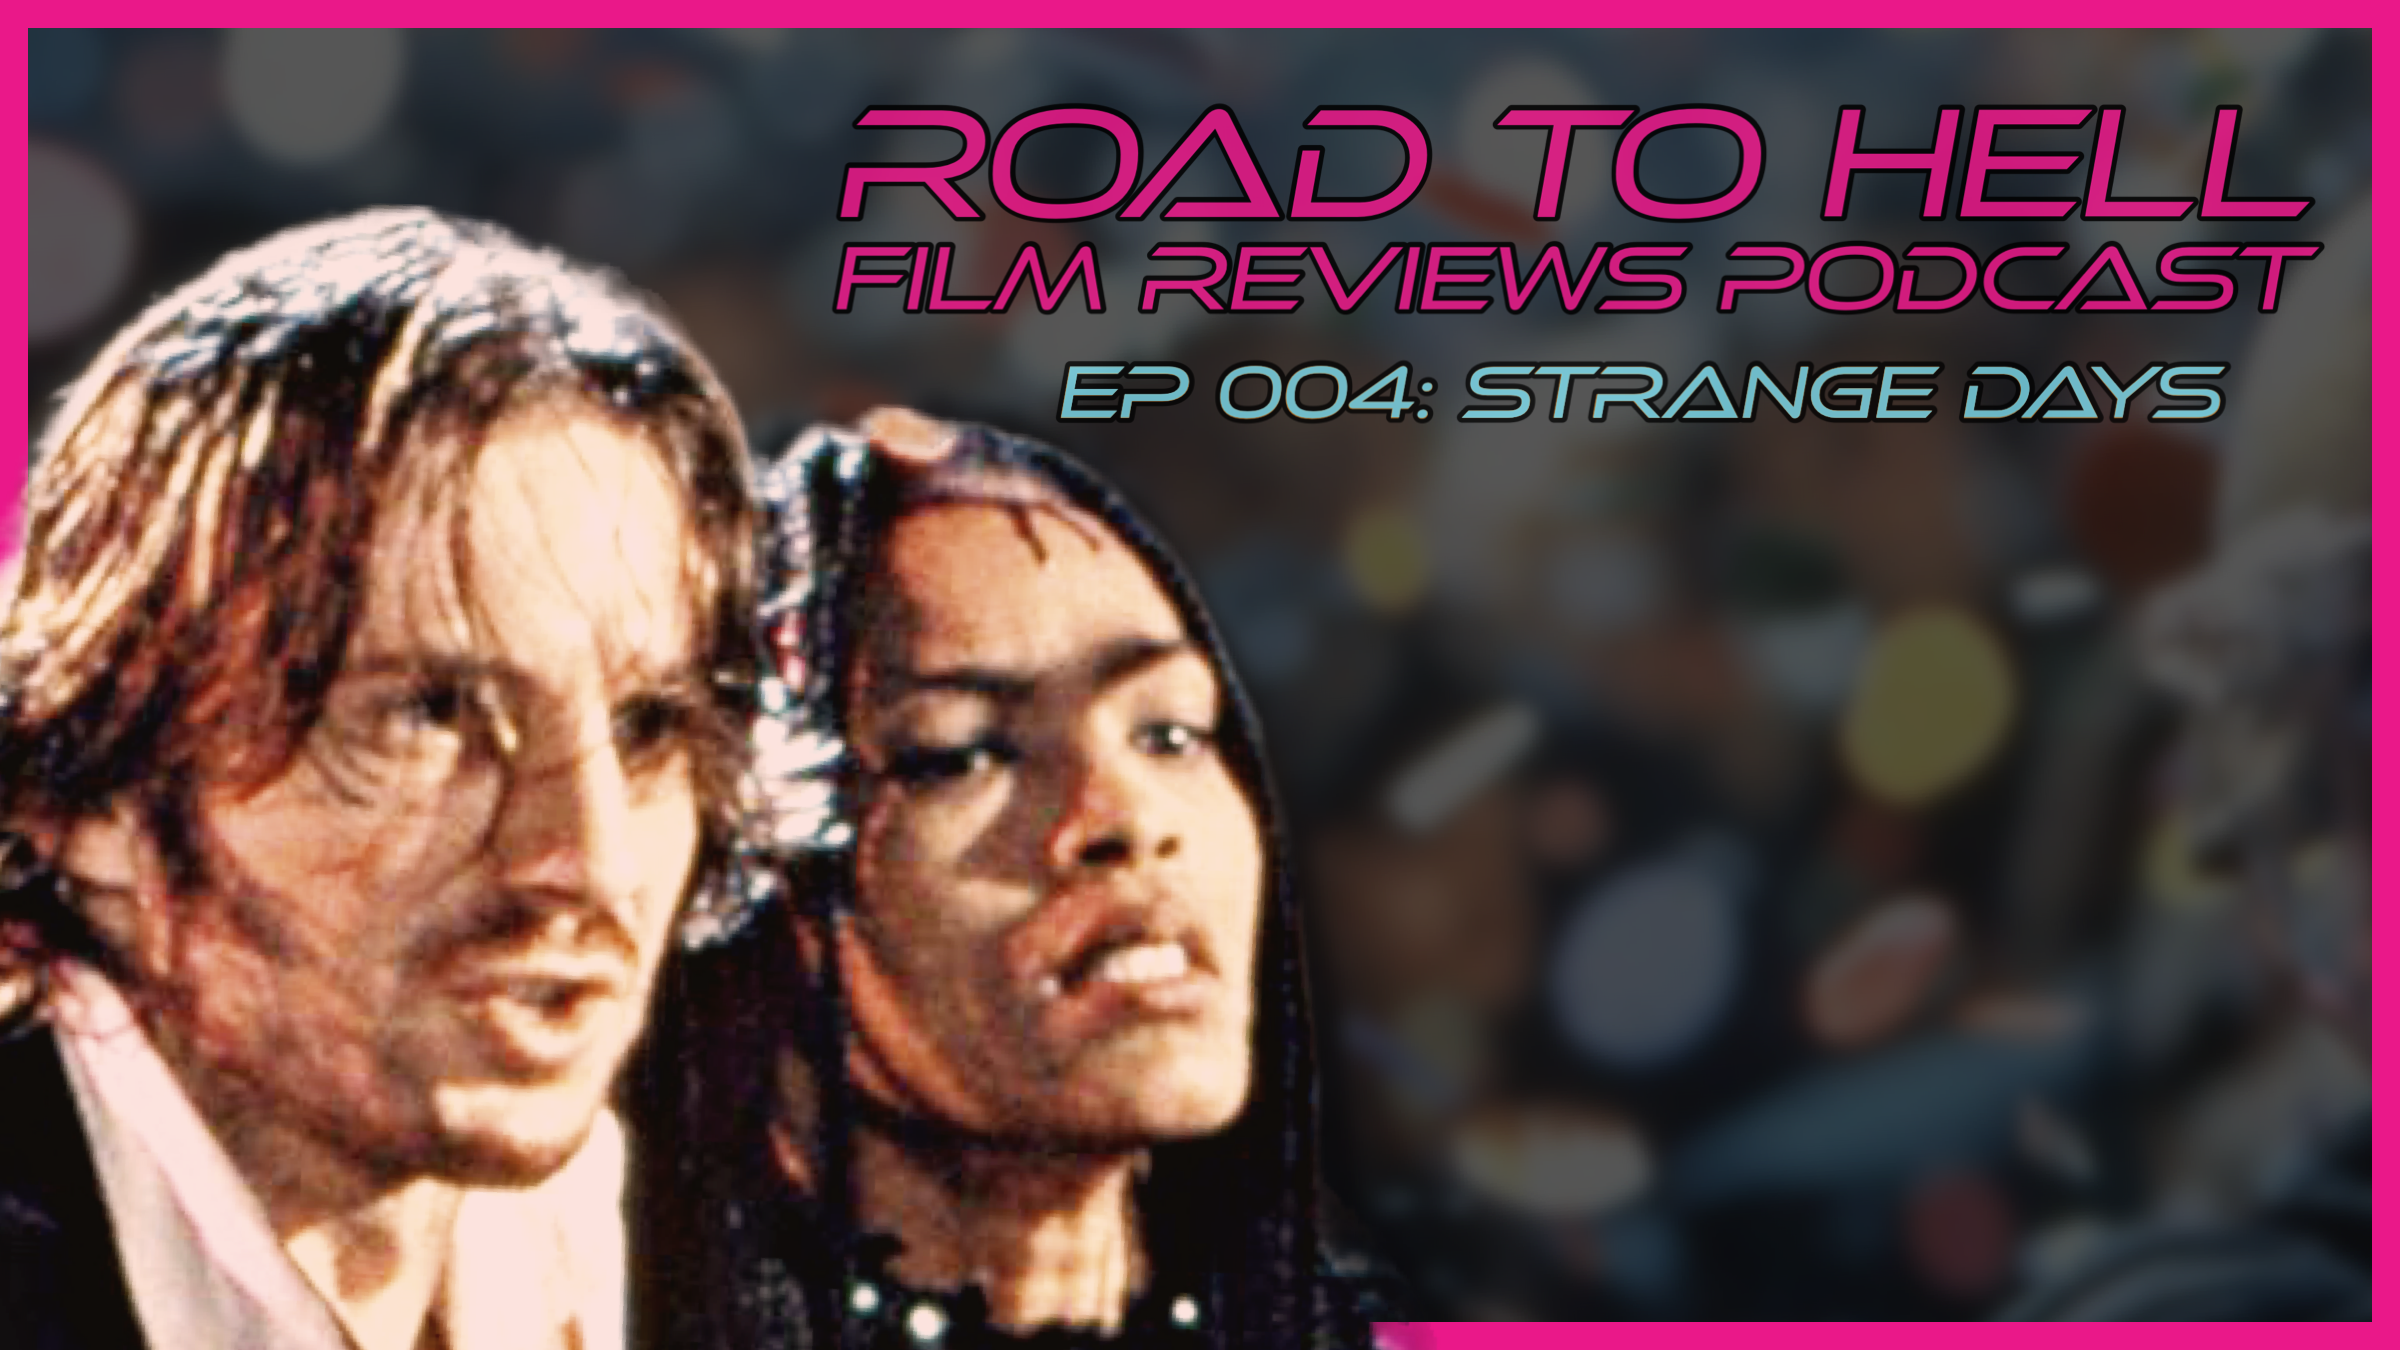 Strange Days Review: Road To Hell Film Reviews Episode 004